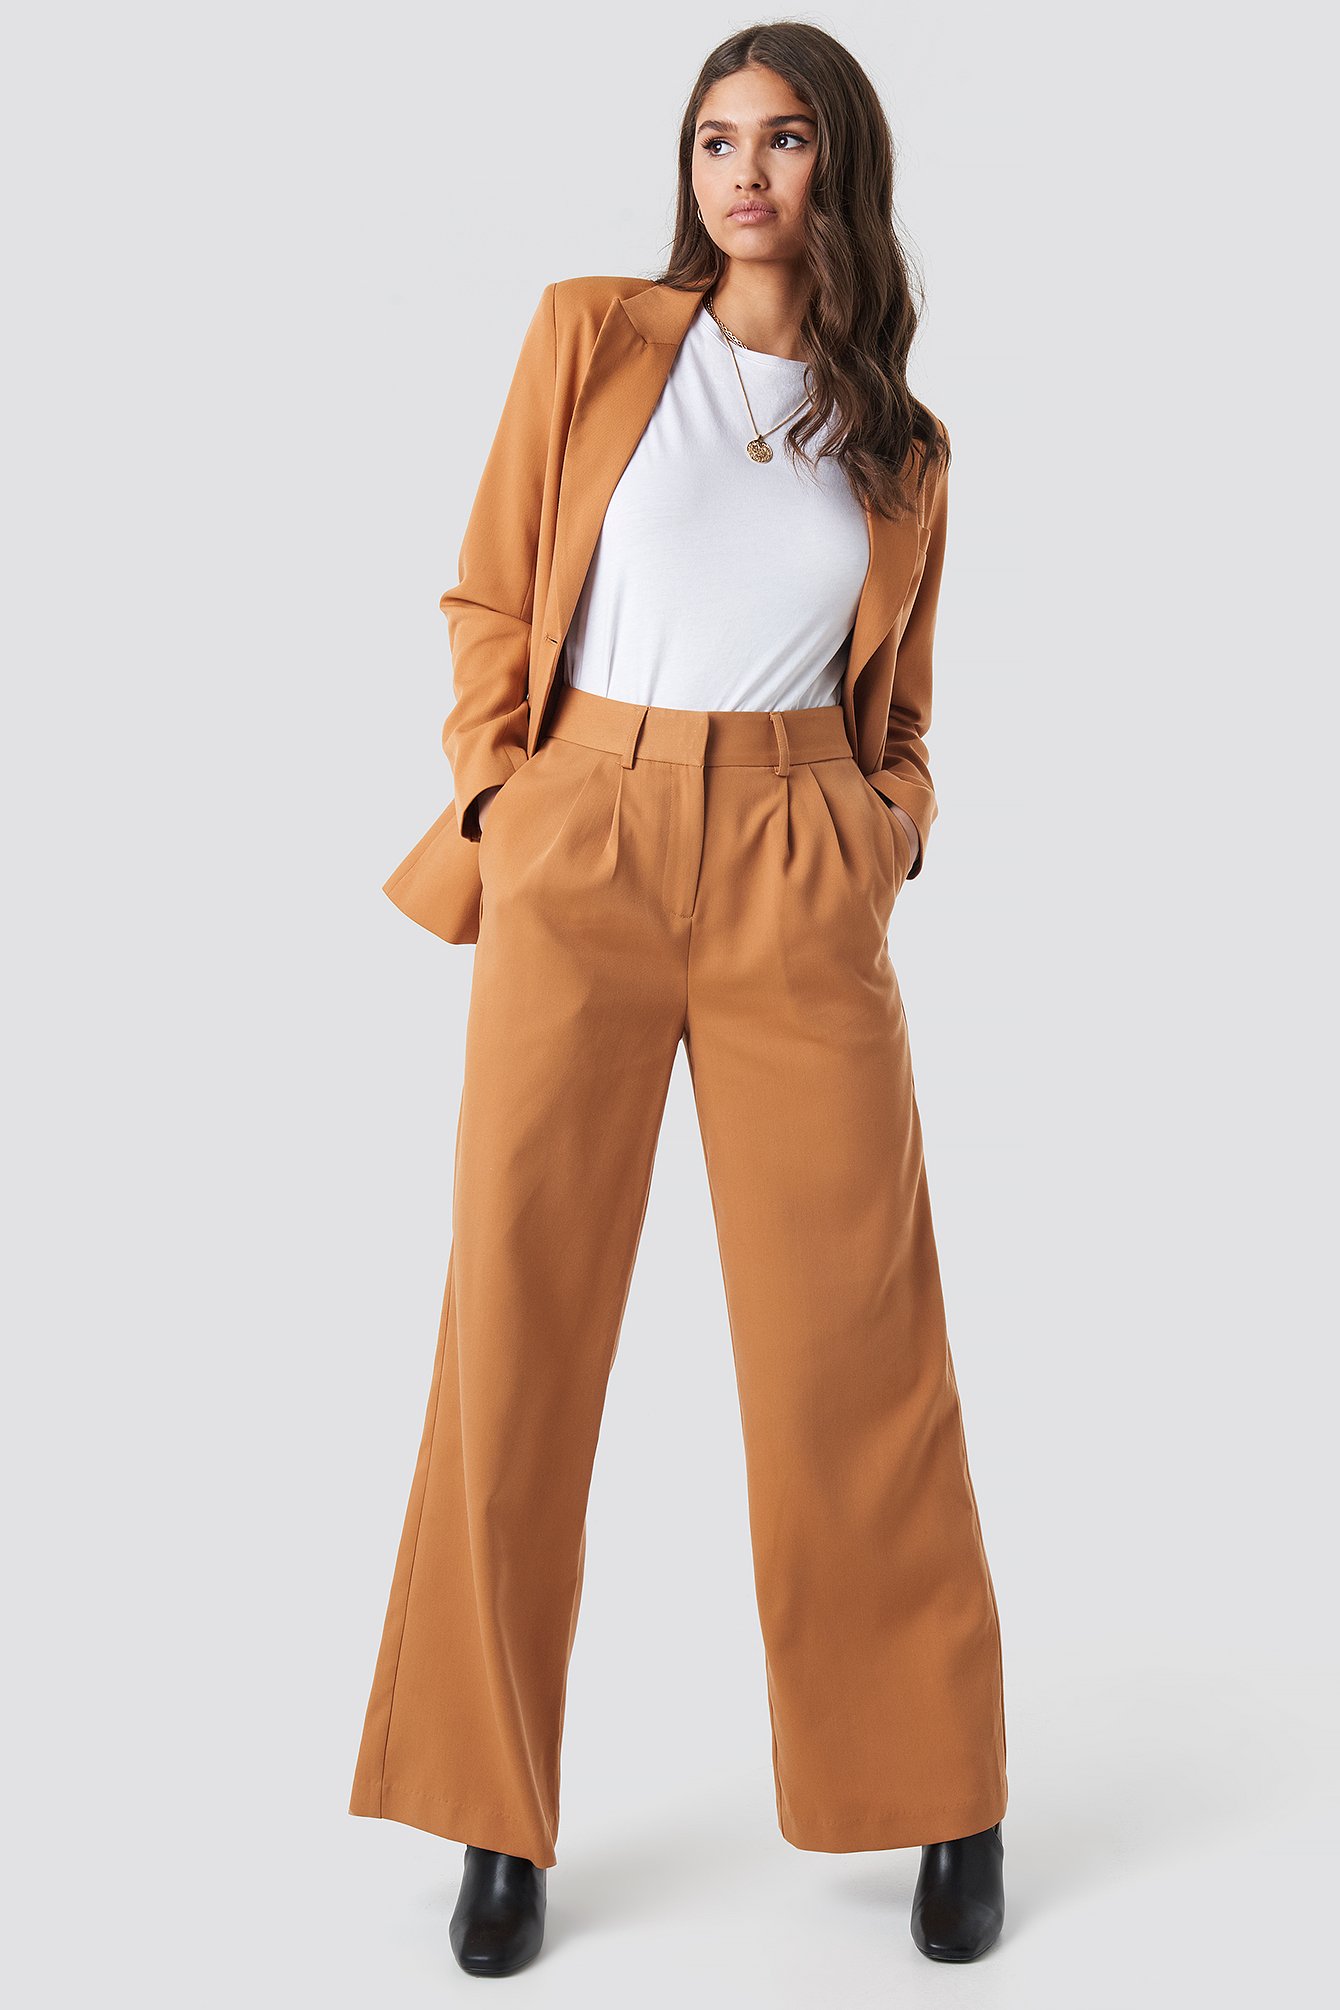 Women Lady Flared Pant Suit Trousers Bootcut Stretch Business Office Formal  Slim  eBay